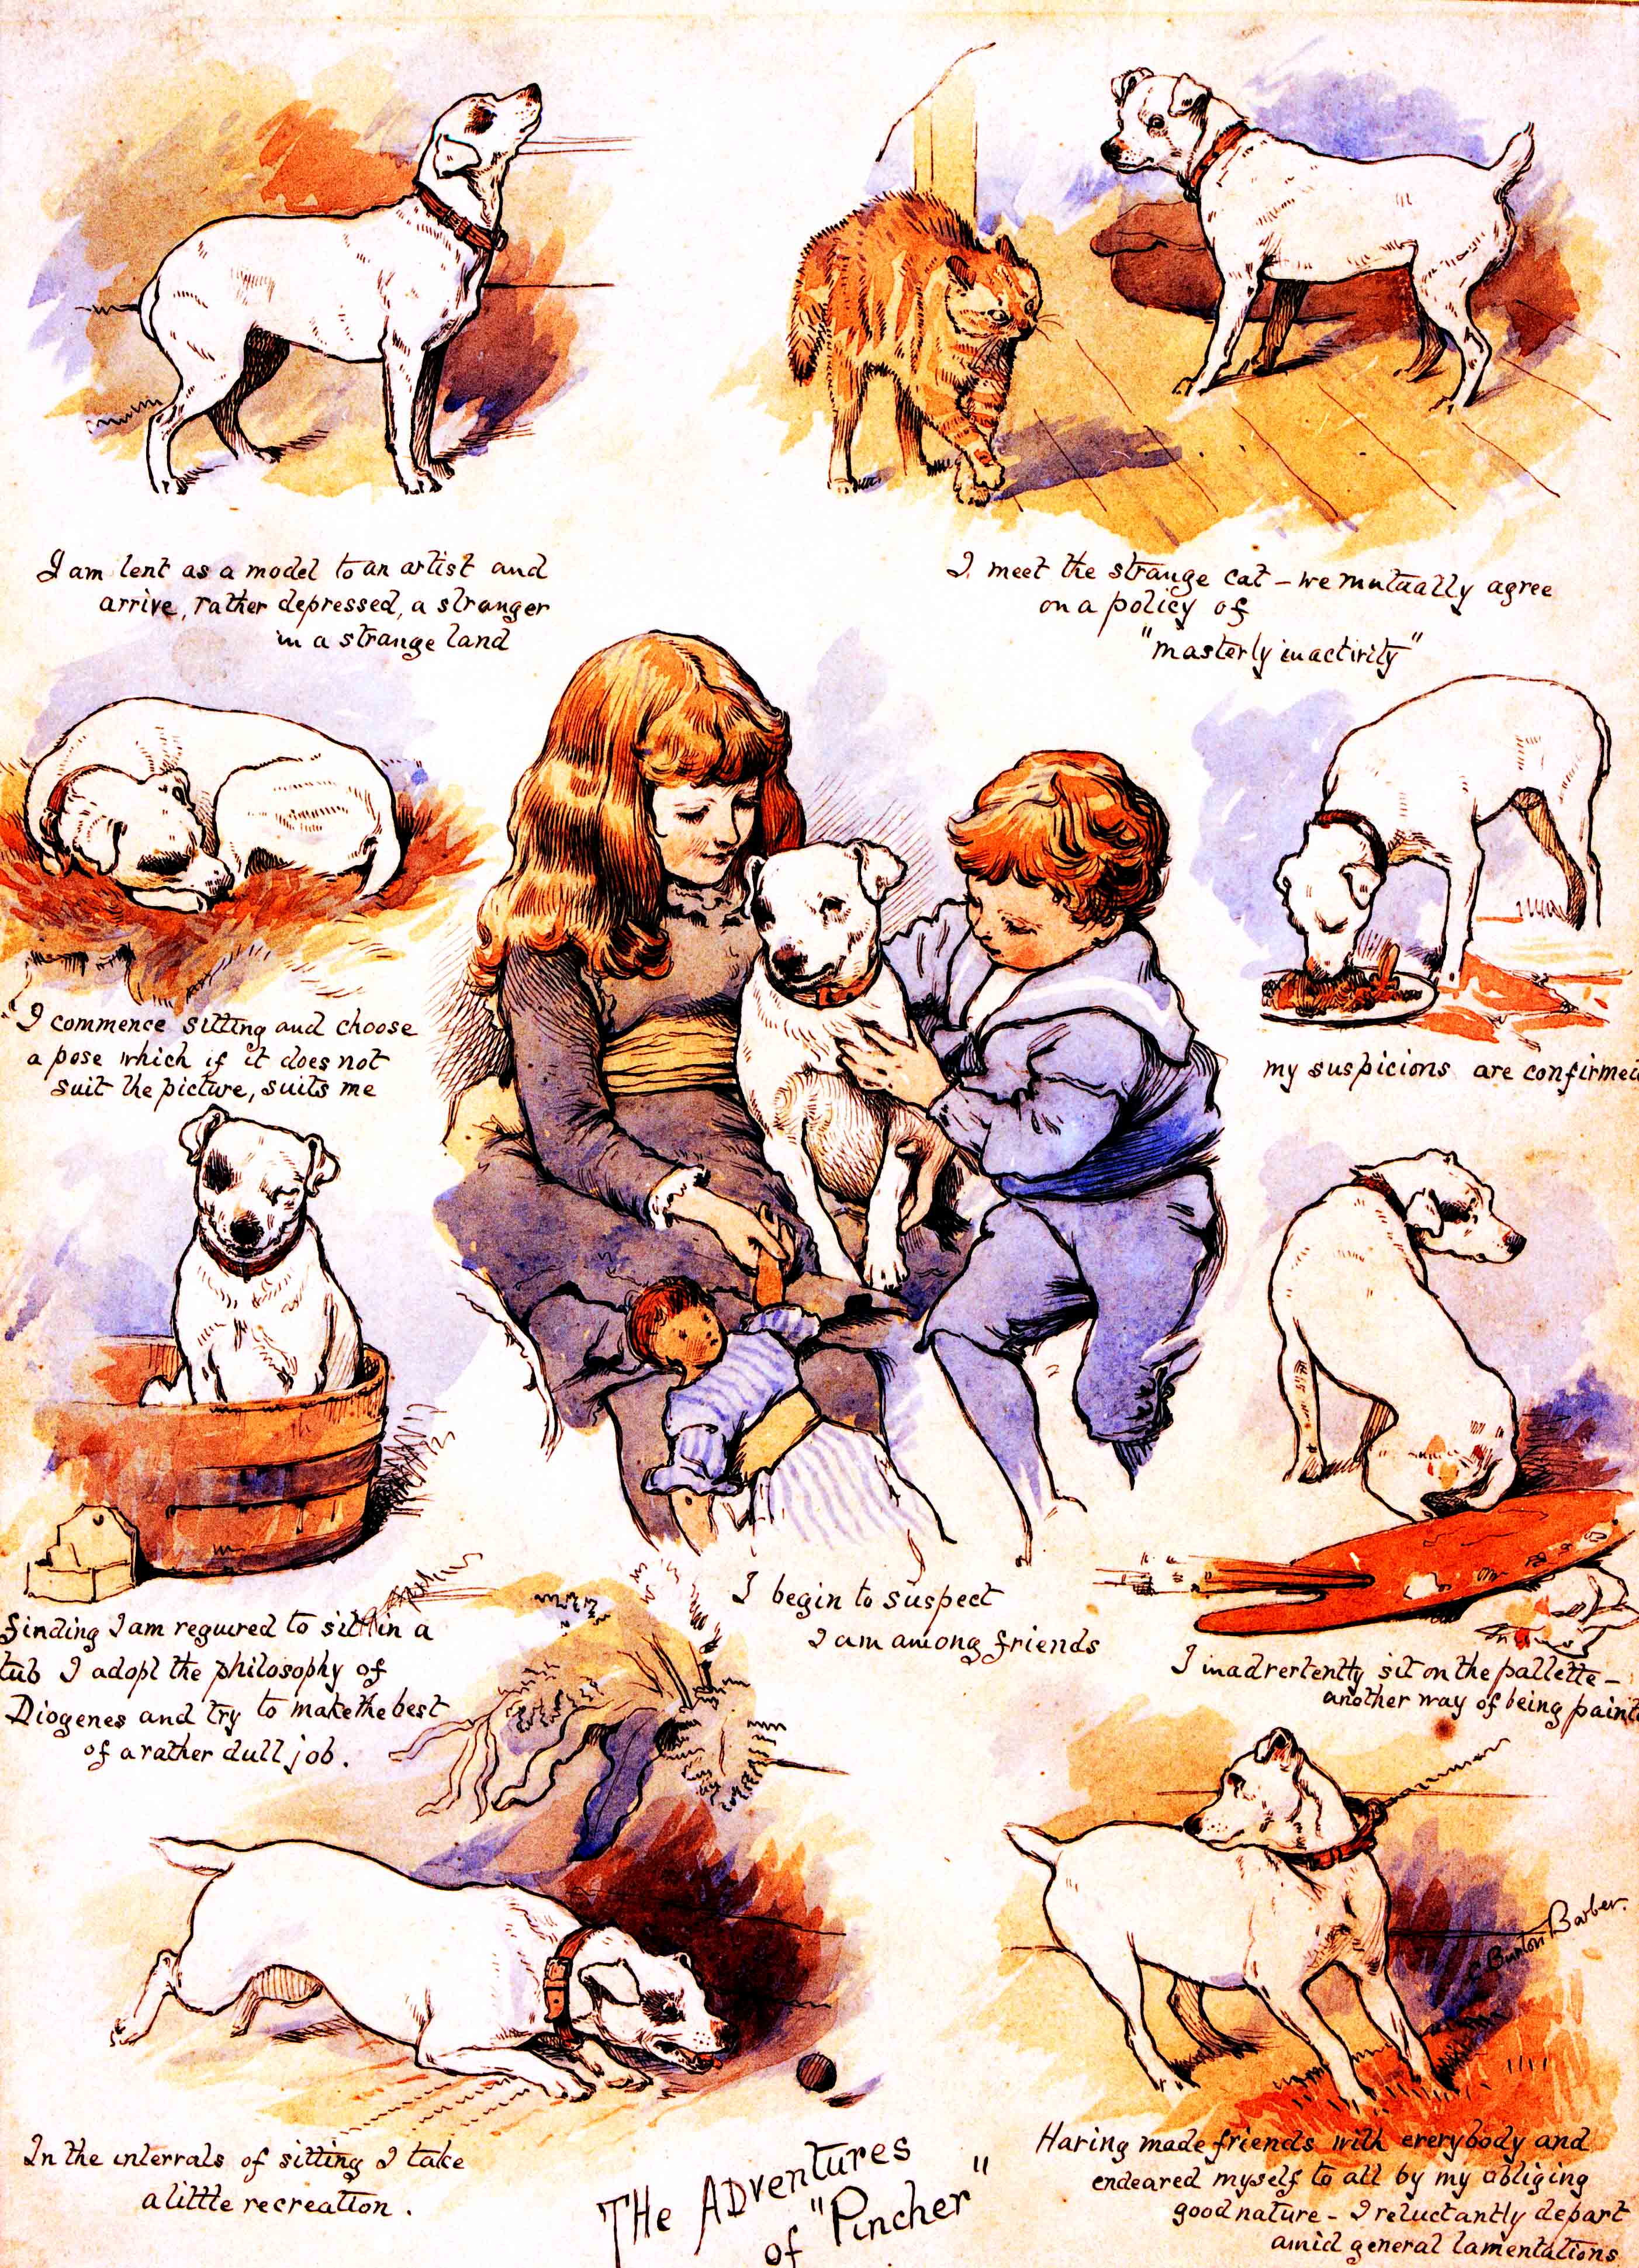 Click to see full size: ?Adventures of Pincher?-   Charles Burton Barber, ROI, English, (1845 ? 1894), the ?Adventures of Pincher? watercolour, pen and ink on paper, circa 1890.<br />
  <br />
  The ?Adventures of Pincher? was an illustrated children?s book inspired by the artist?s daily visits for more than 20 years, to the Queen Victoria?s homes ?s painting her dogs and grand children.<br />
